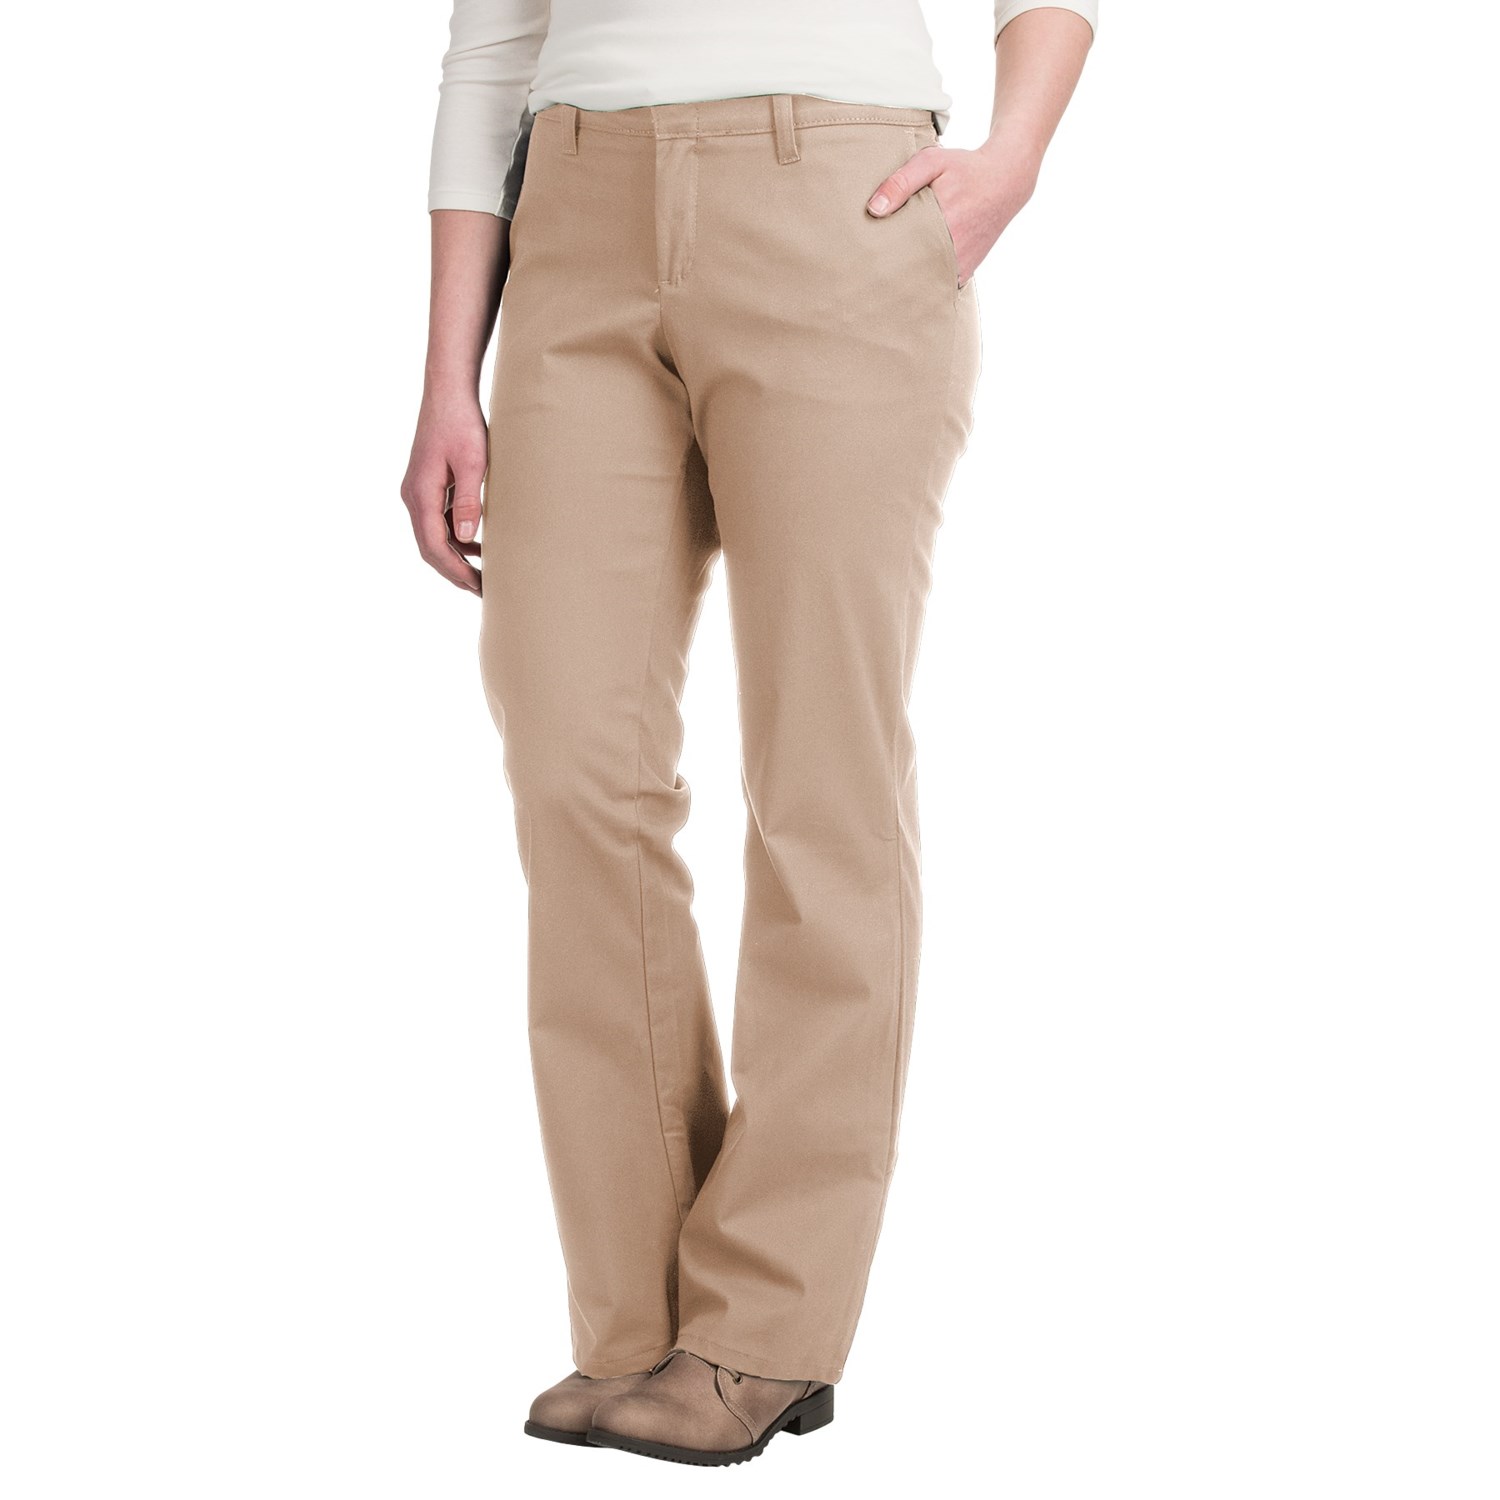 Dickies Stretch-Twill Pants (For Women) - Save 53%